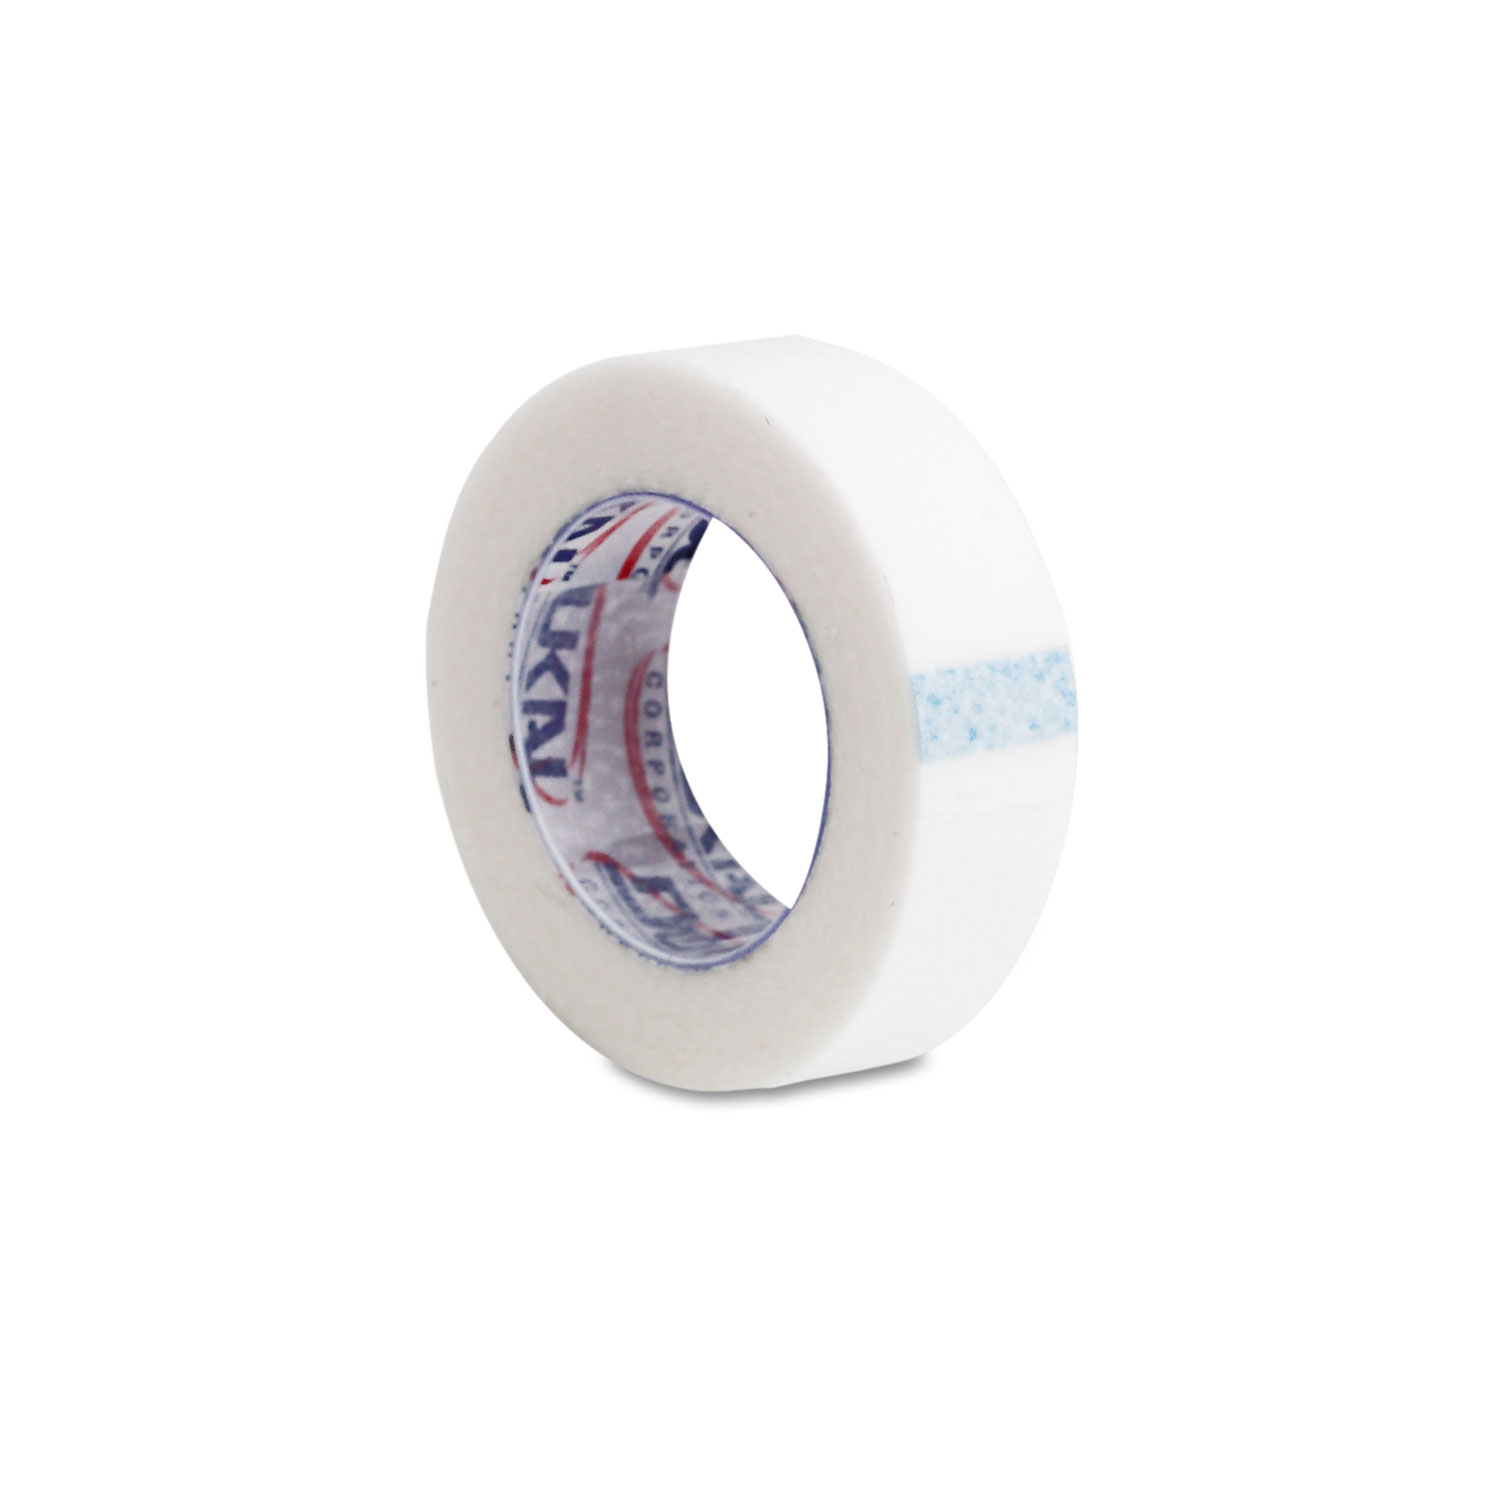 First Aid Tape, 1/2 x 10 yds, Acrylic, White